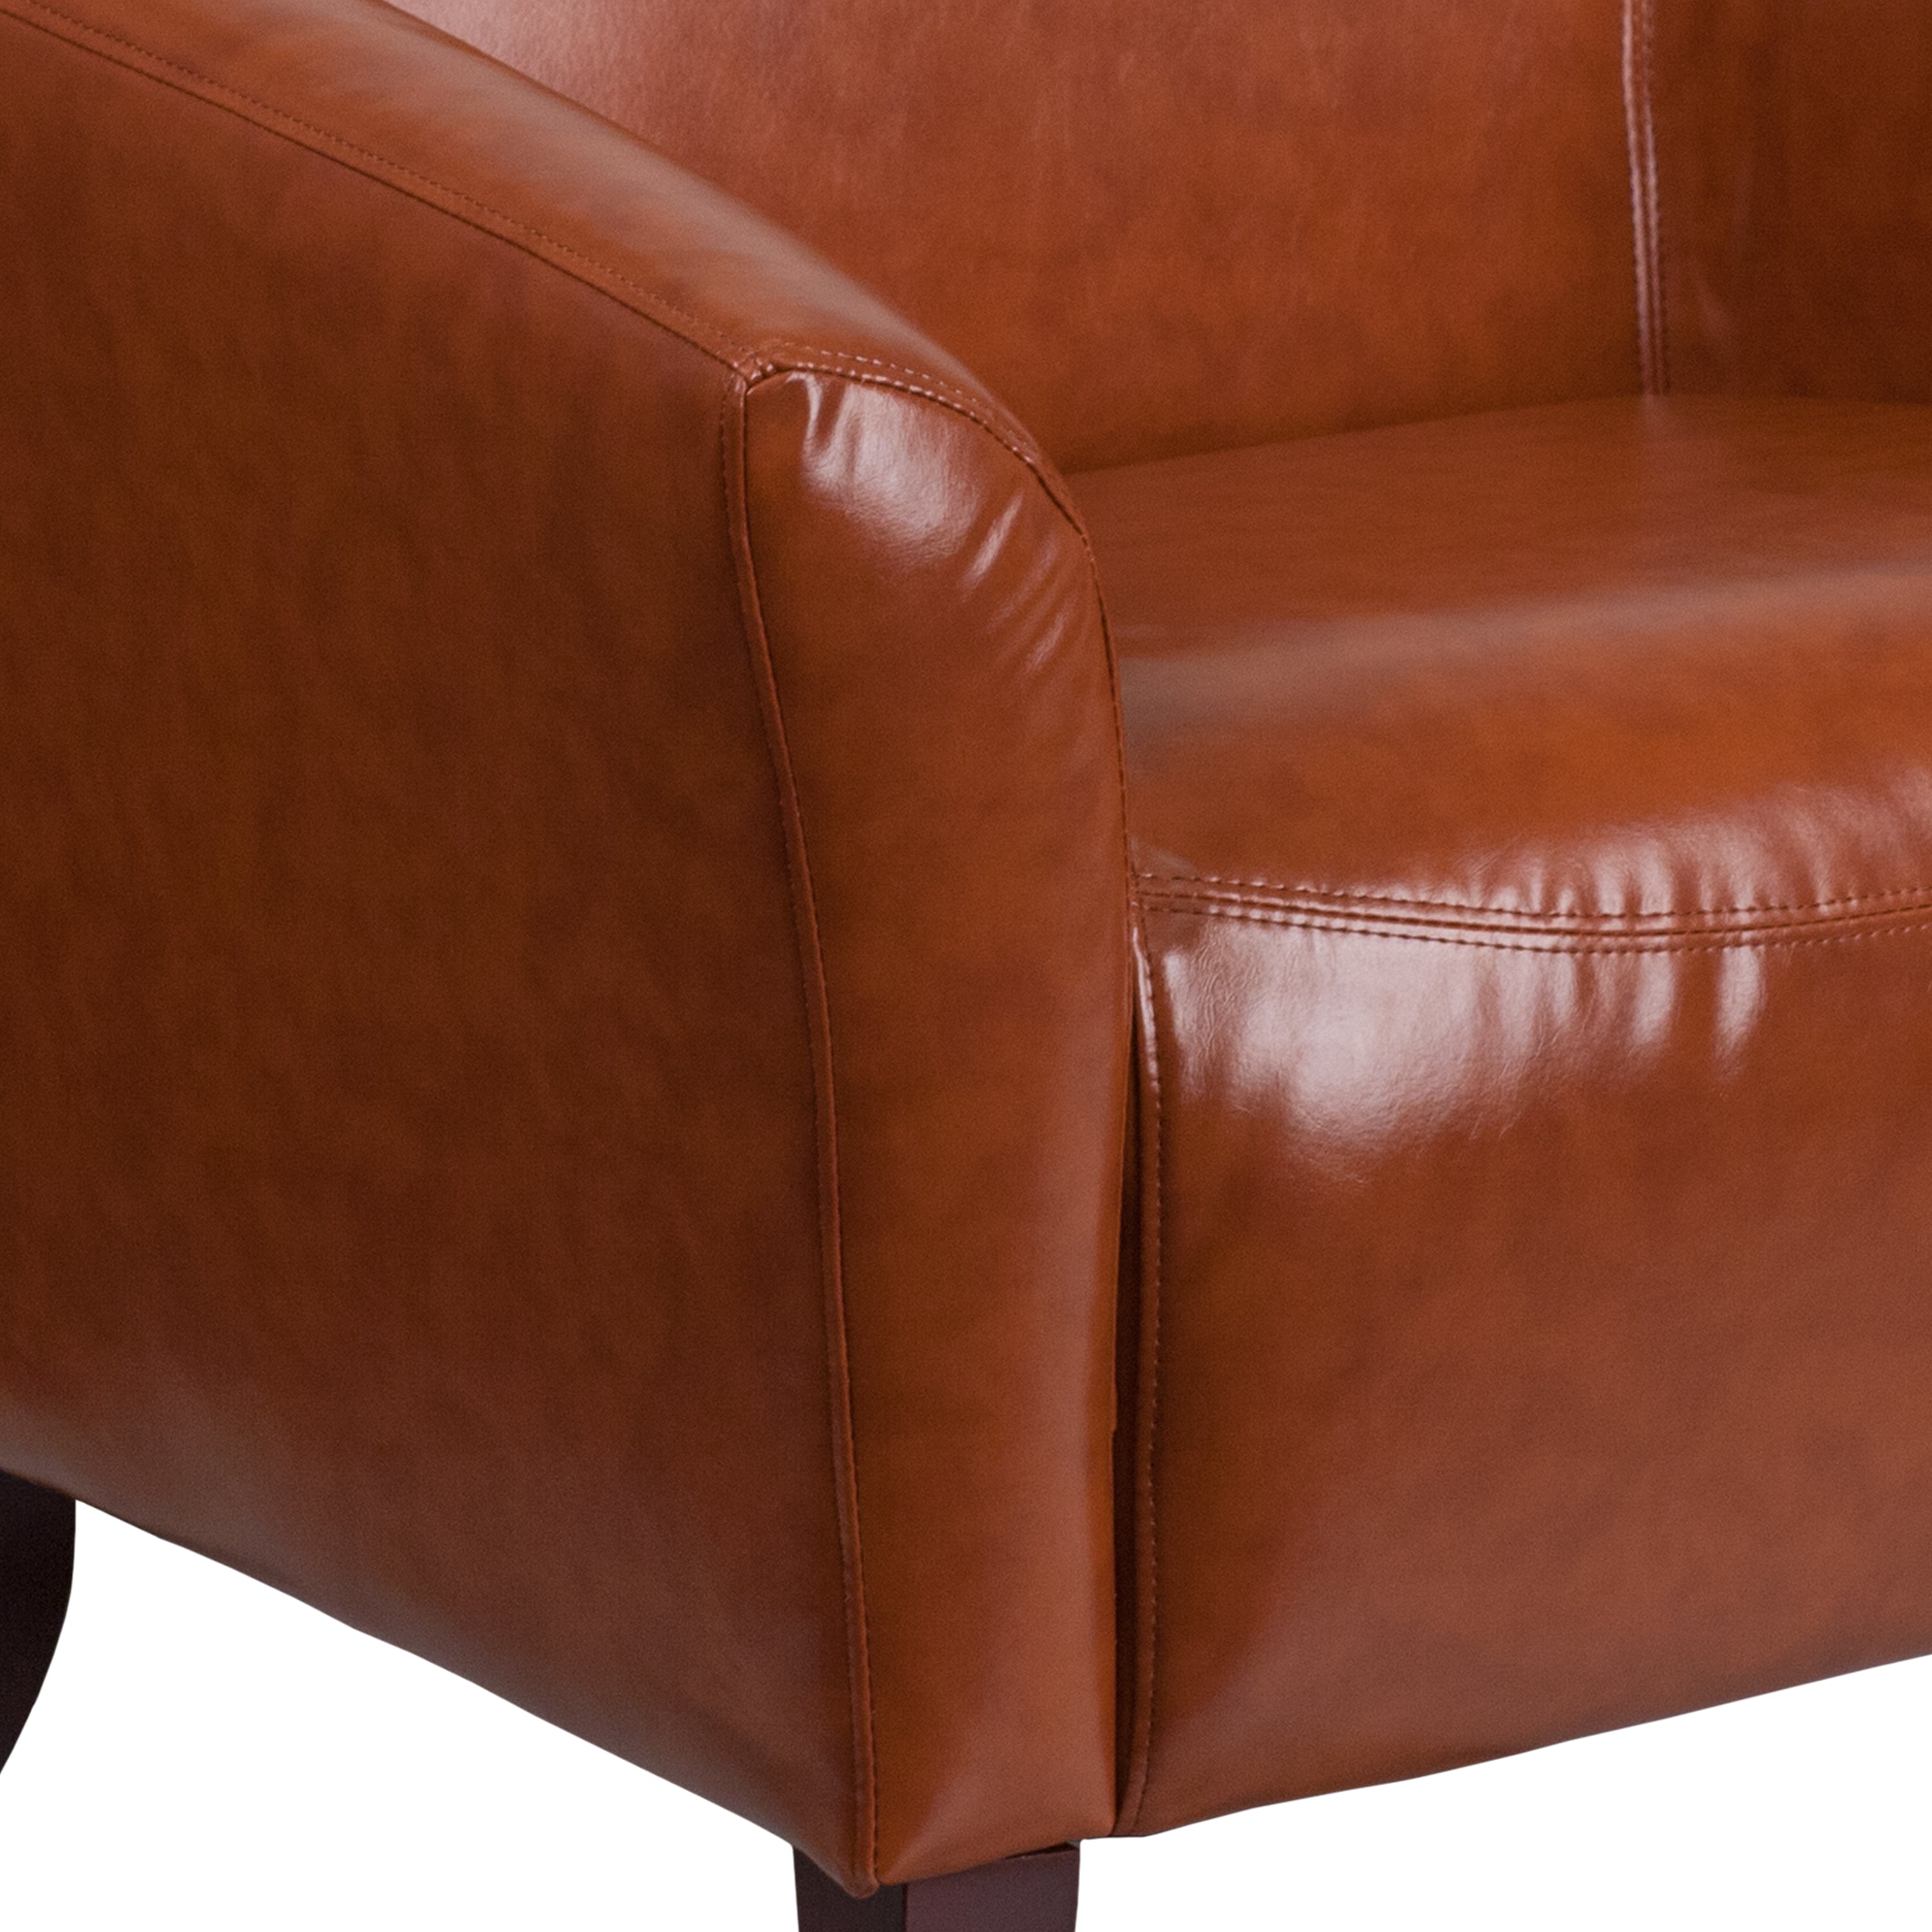 HERCULES Imperial Series LeatherSoft Sofa with Cherry Wood Feet-Reception Sofa-Flash Furniture-Wall2Wall Furnishings